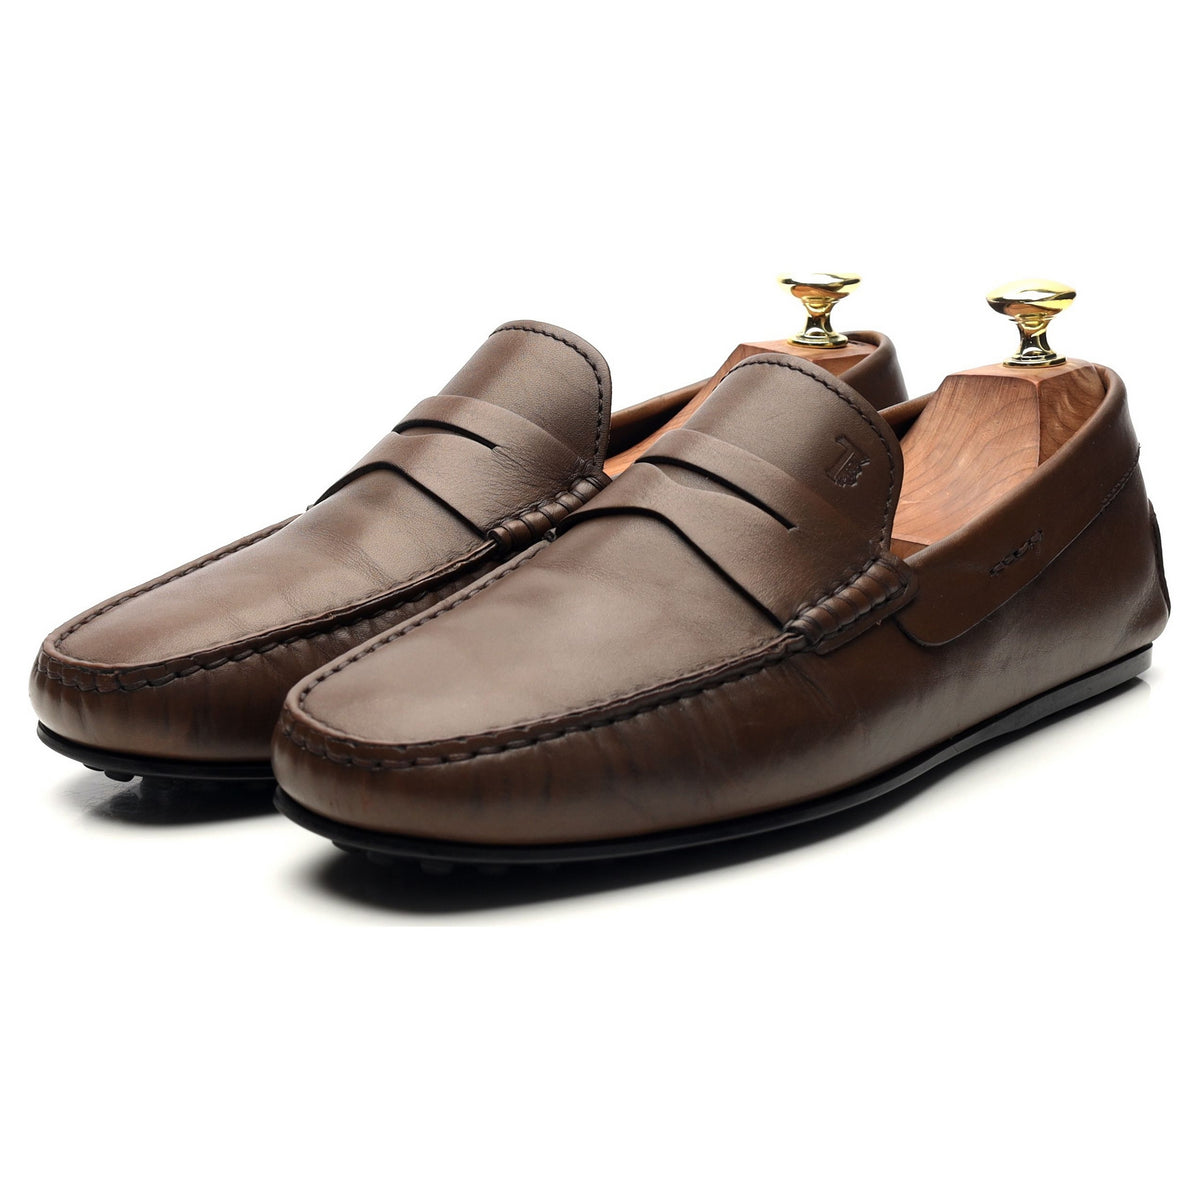 Gommino Brown Leather Driving Loafers UK 7